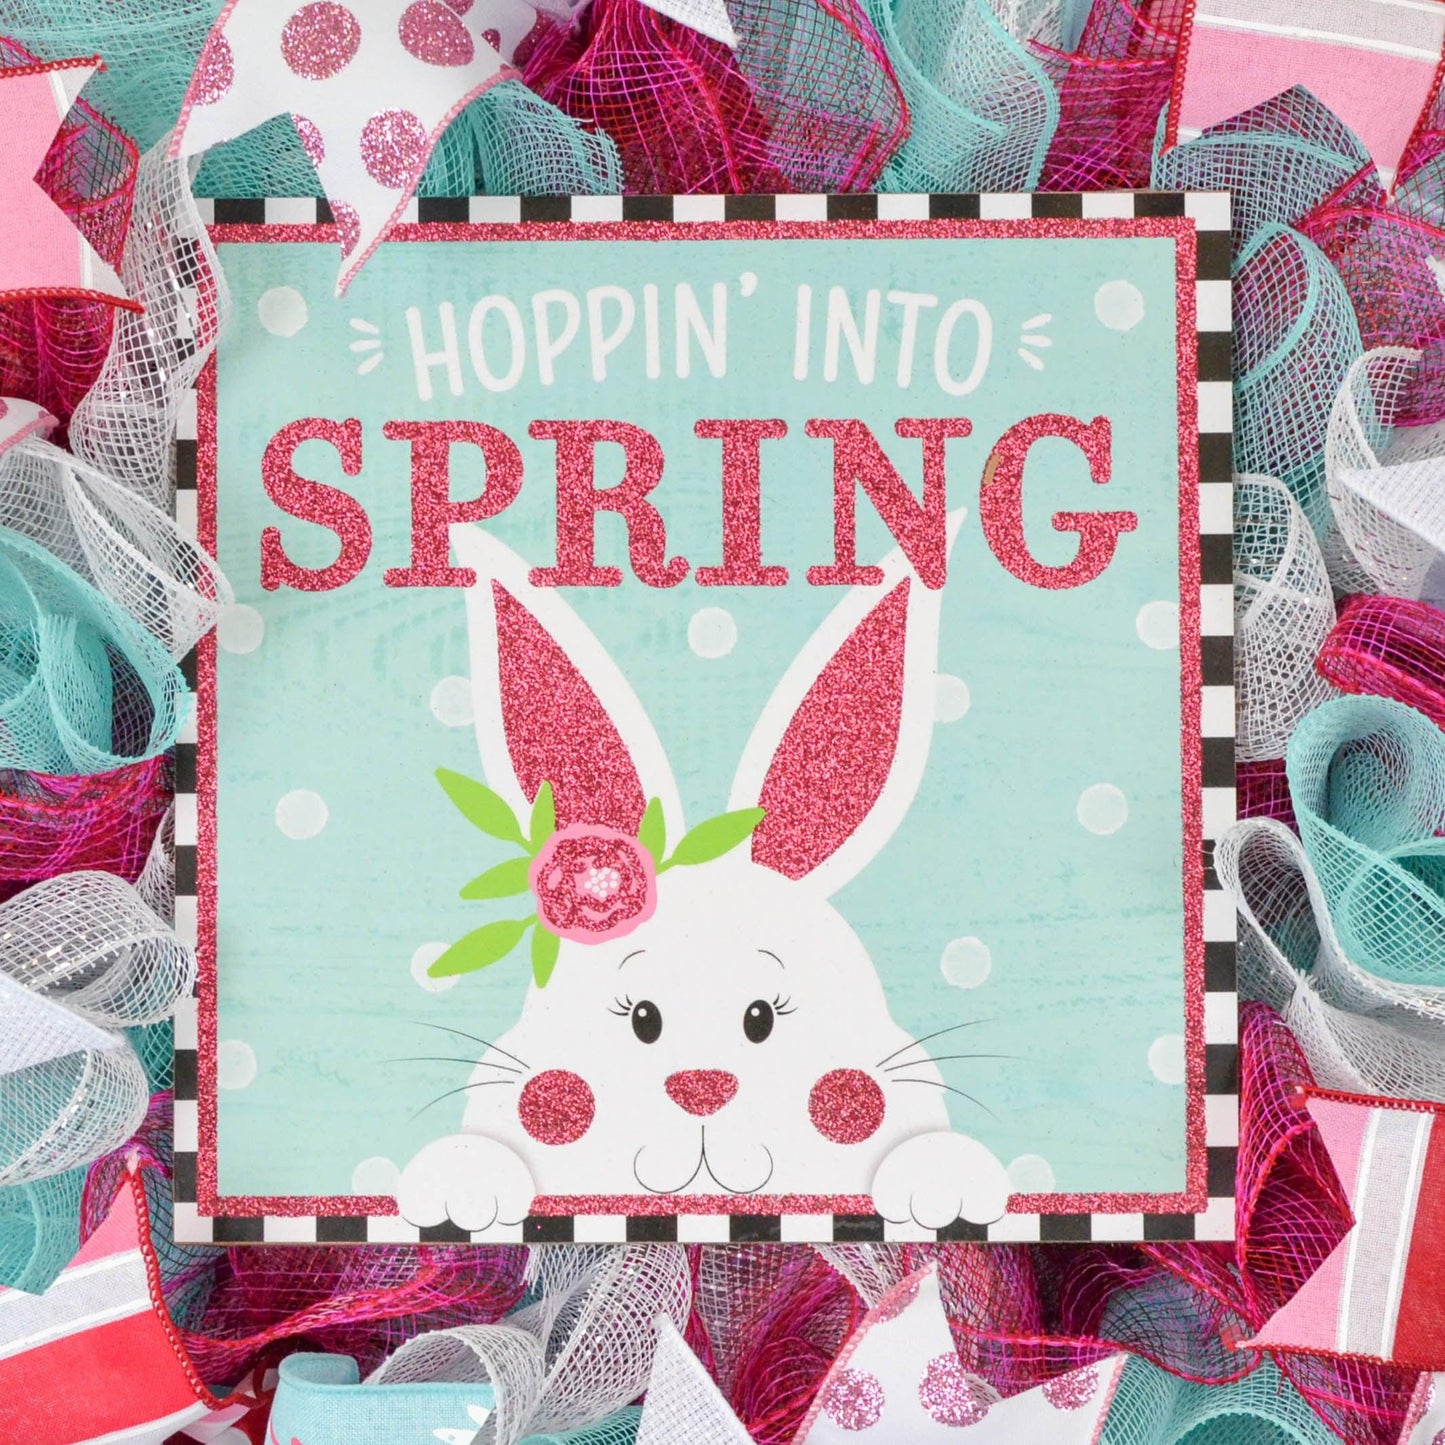 Pink and Turquoise Hopping into Spring Wreath - Summer Decor - Easter Door Decorations - Pink Turquoise Bunny Wreaths - Pink Door Wreaths